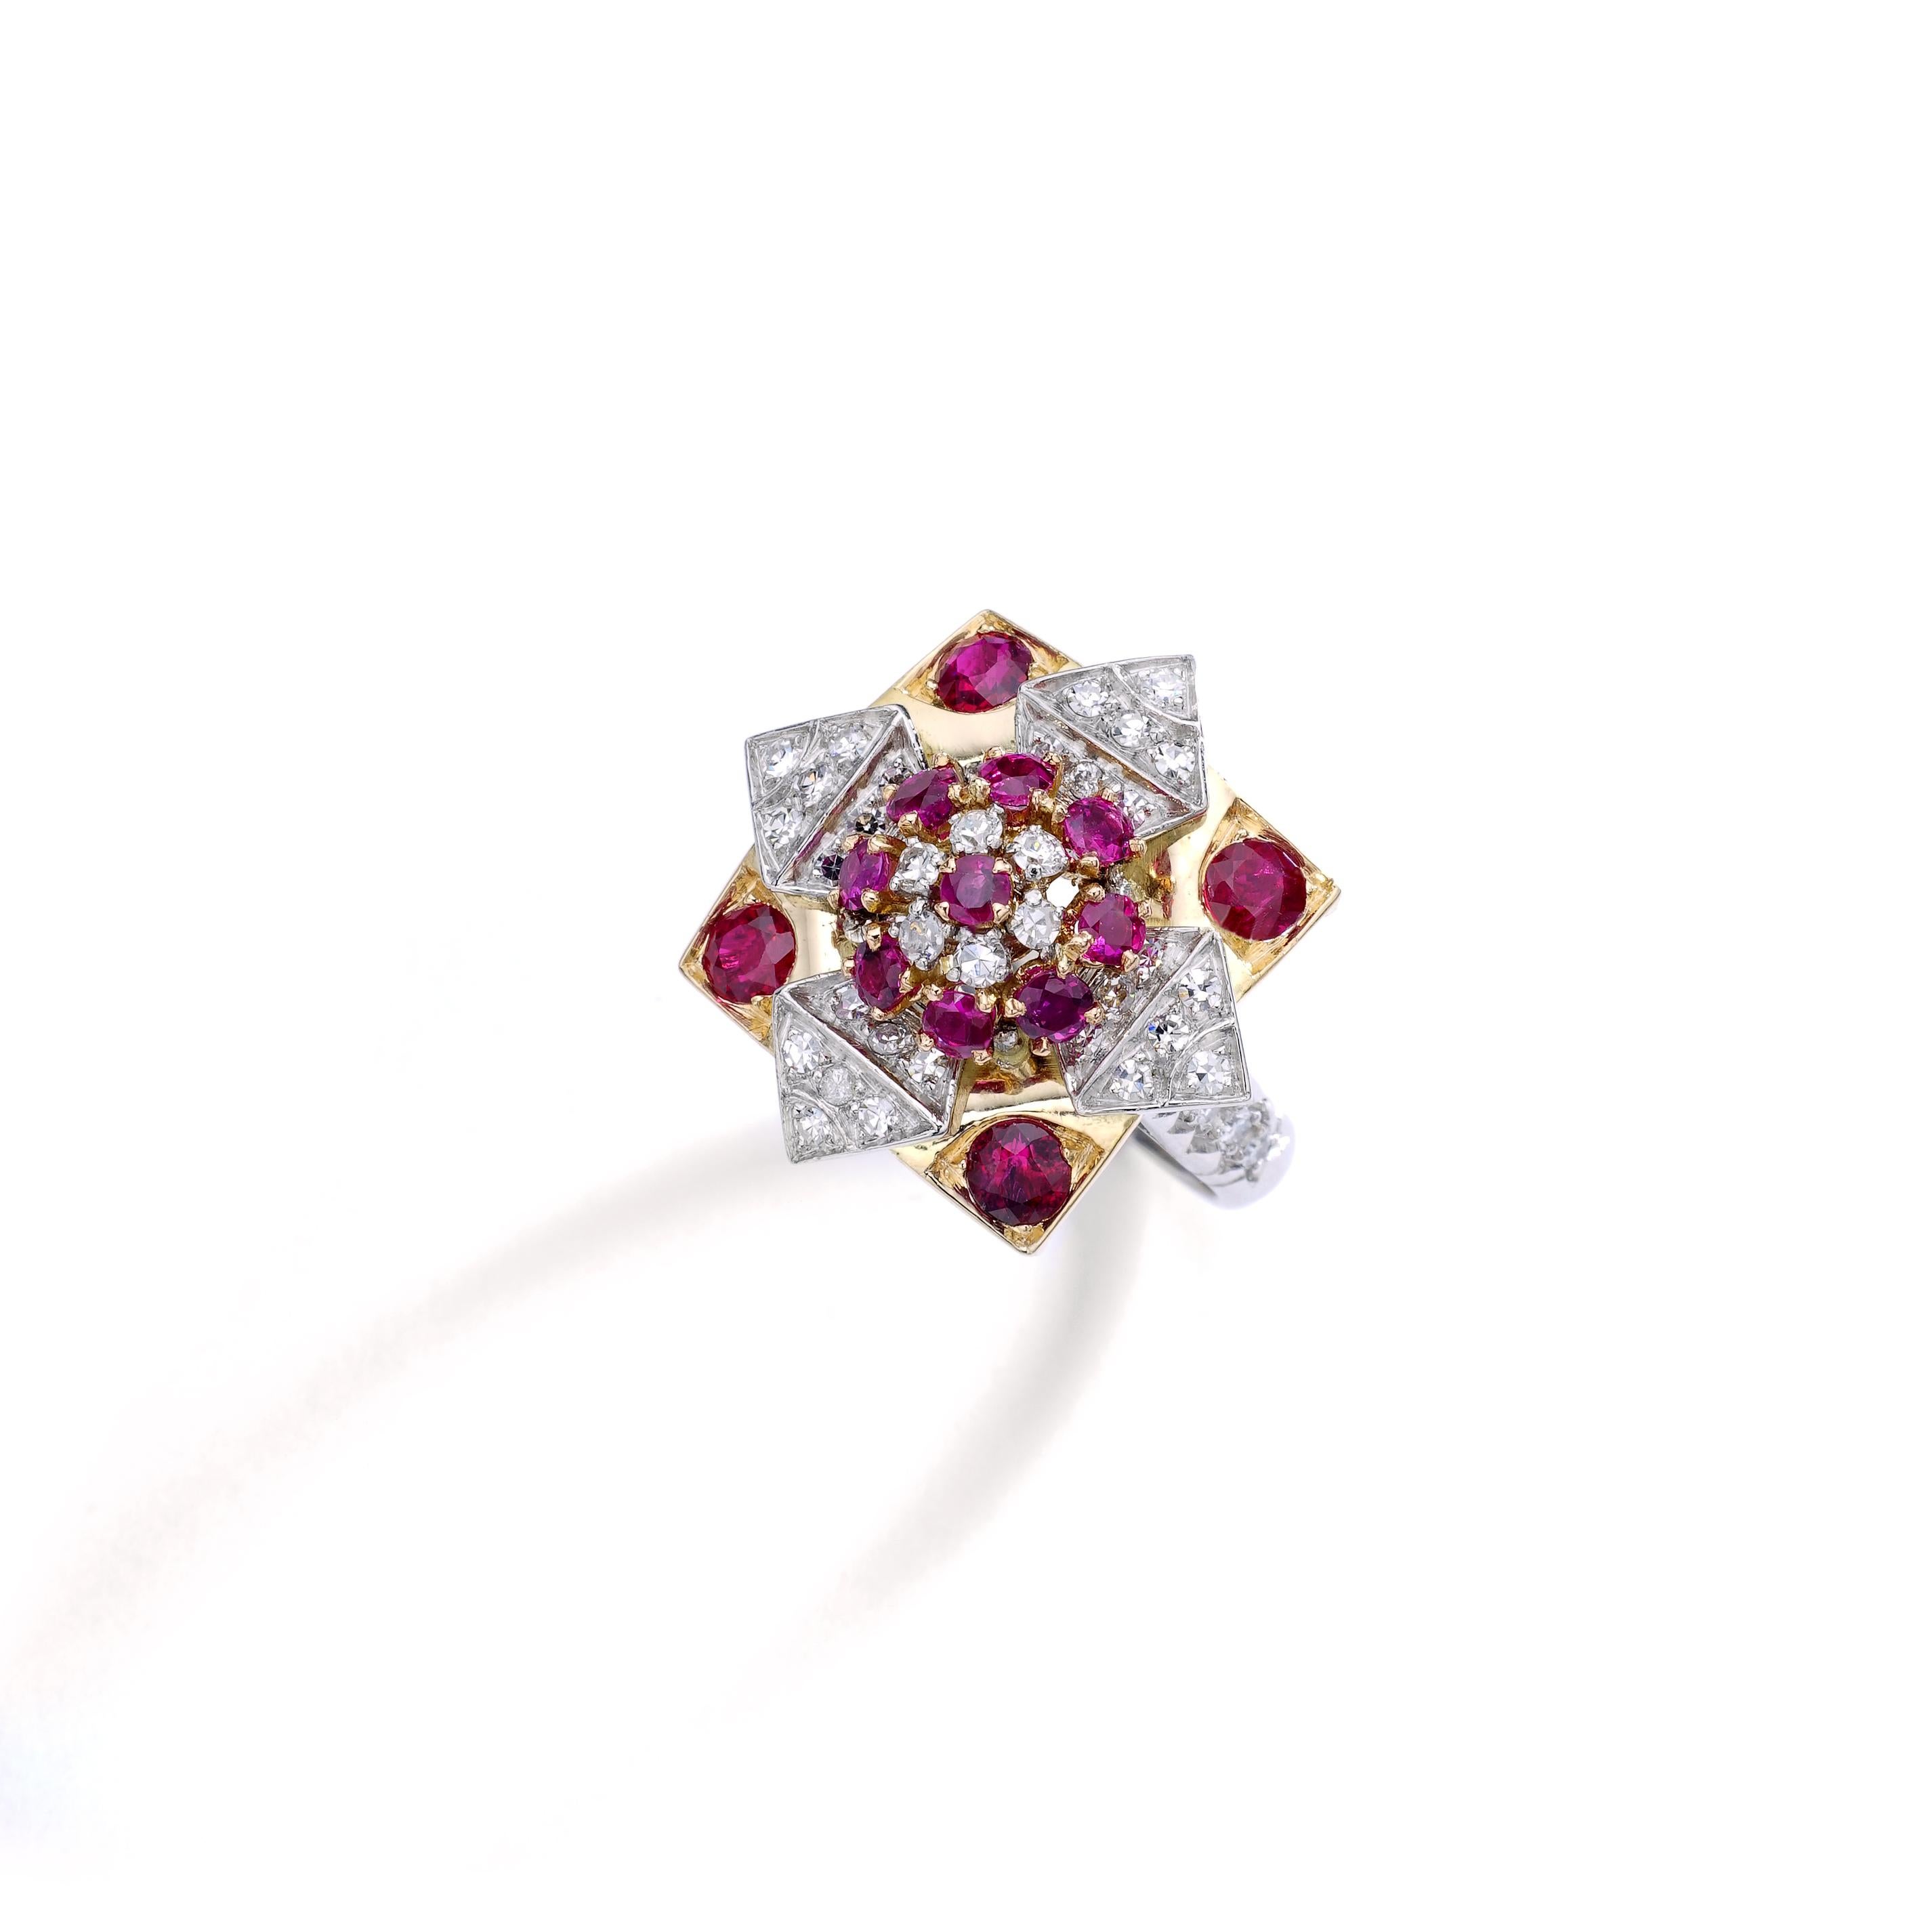 Stylized Flower star platinum and yellow gold 18k 75 ring with diamond and ruby.
French assay marks.

Ring size: 6.